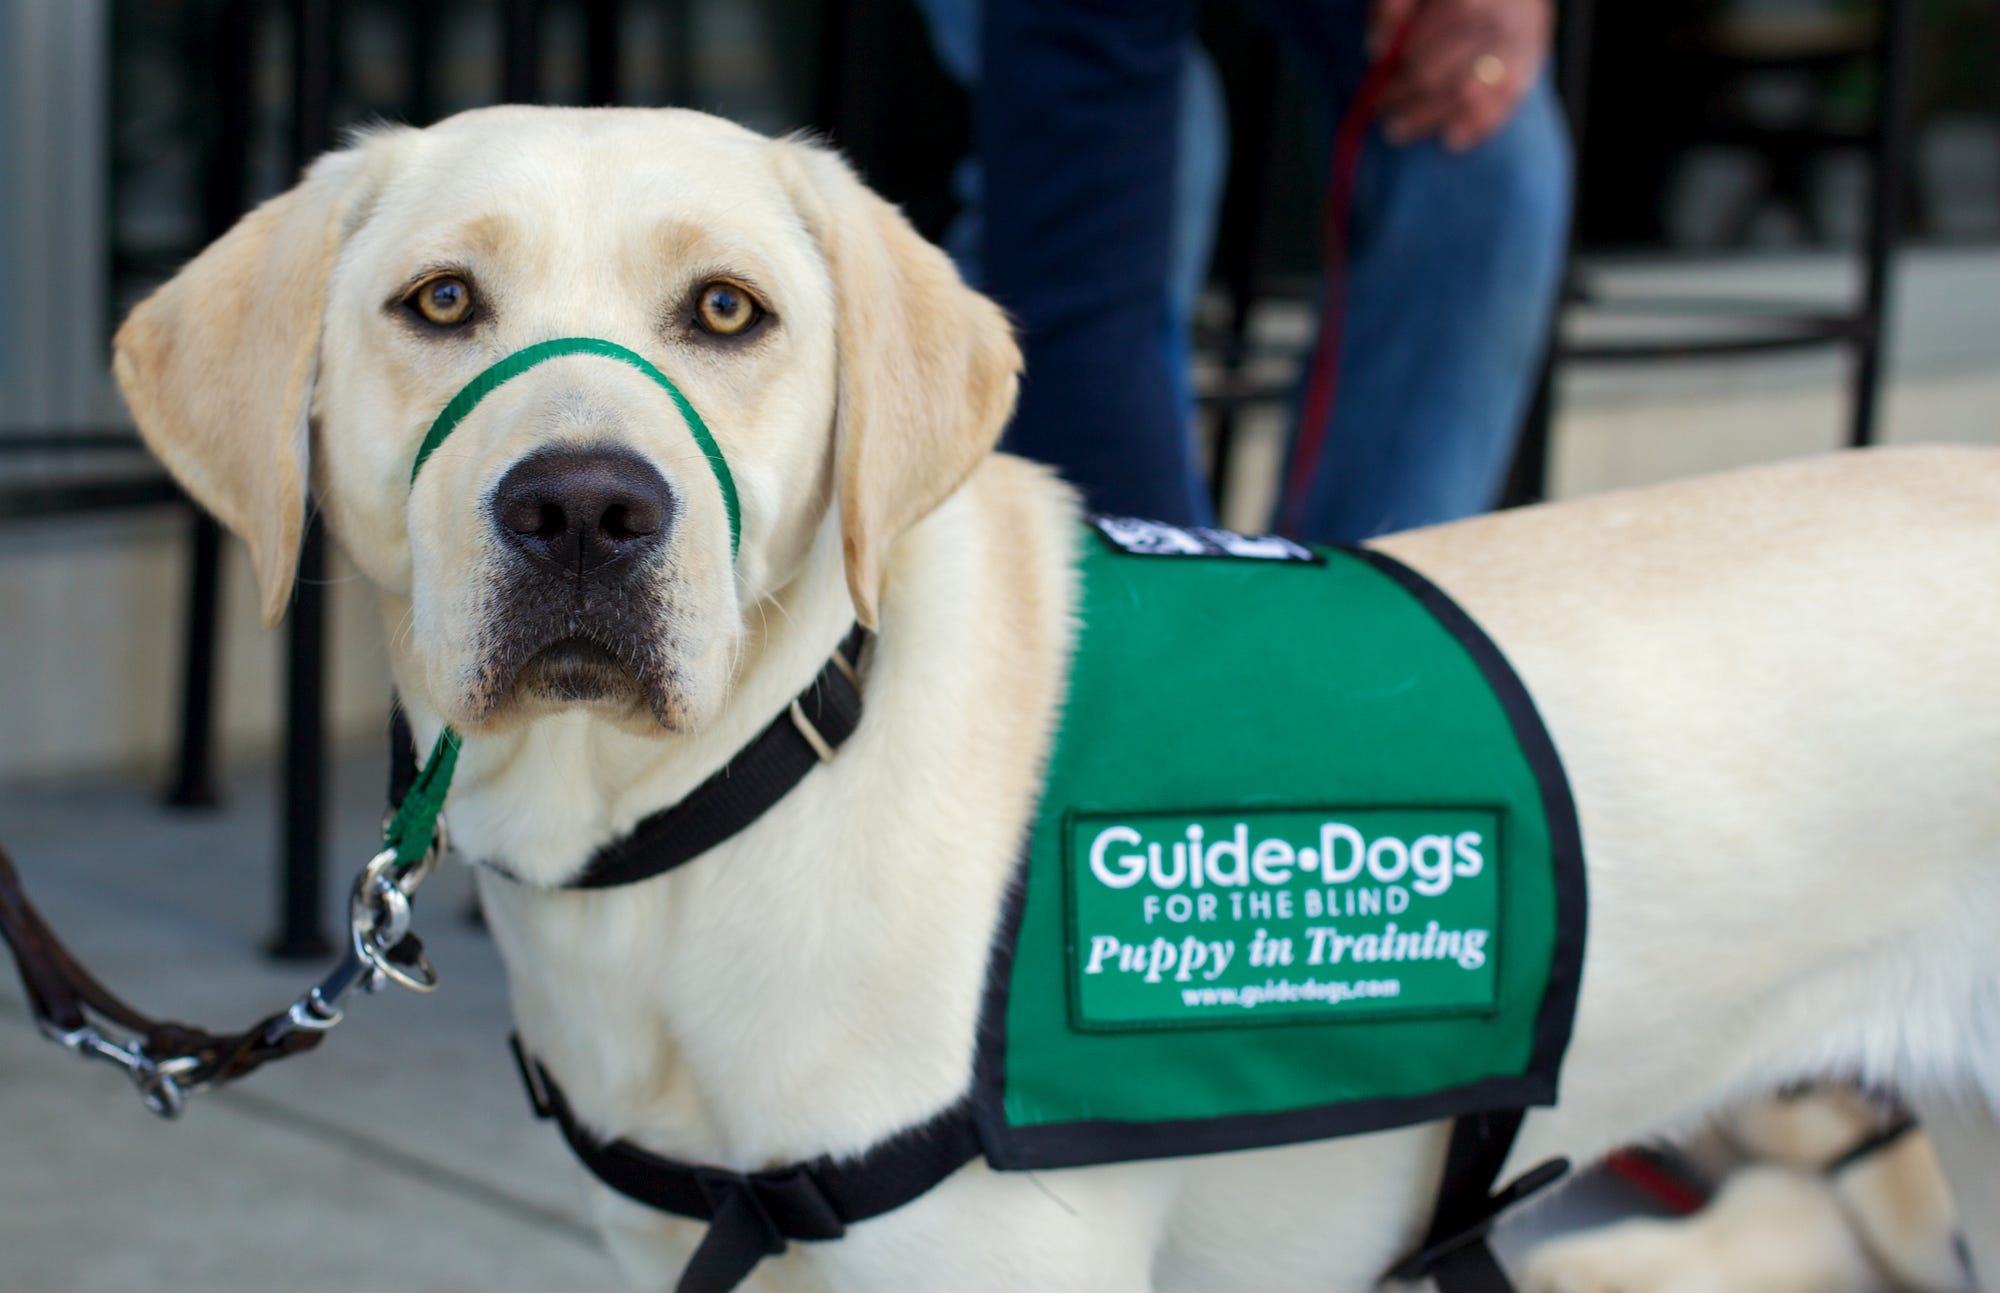 Yellow labrador Susanna wearing her Guide-Dogs for the blind, Puppy in Training vest